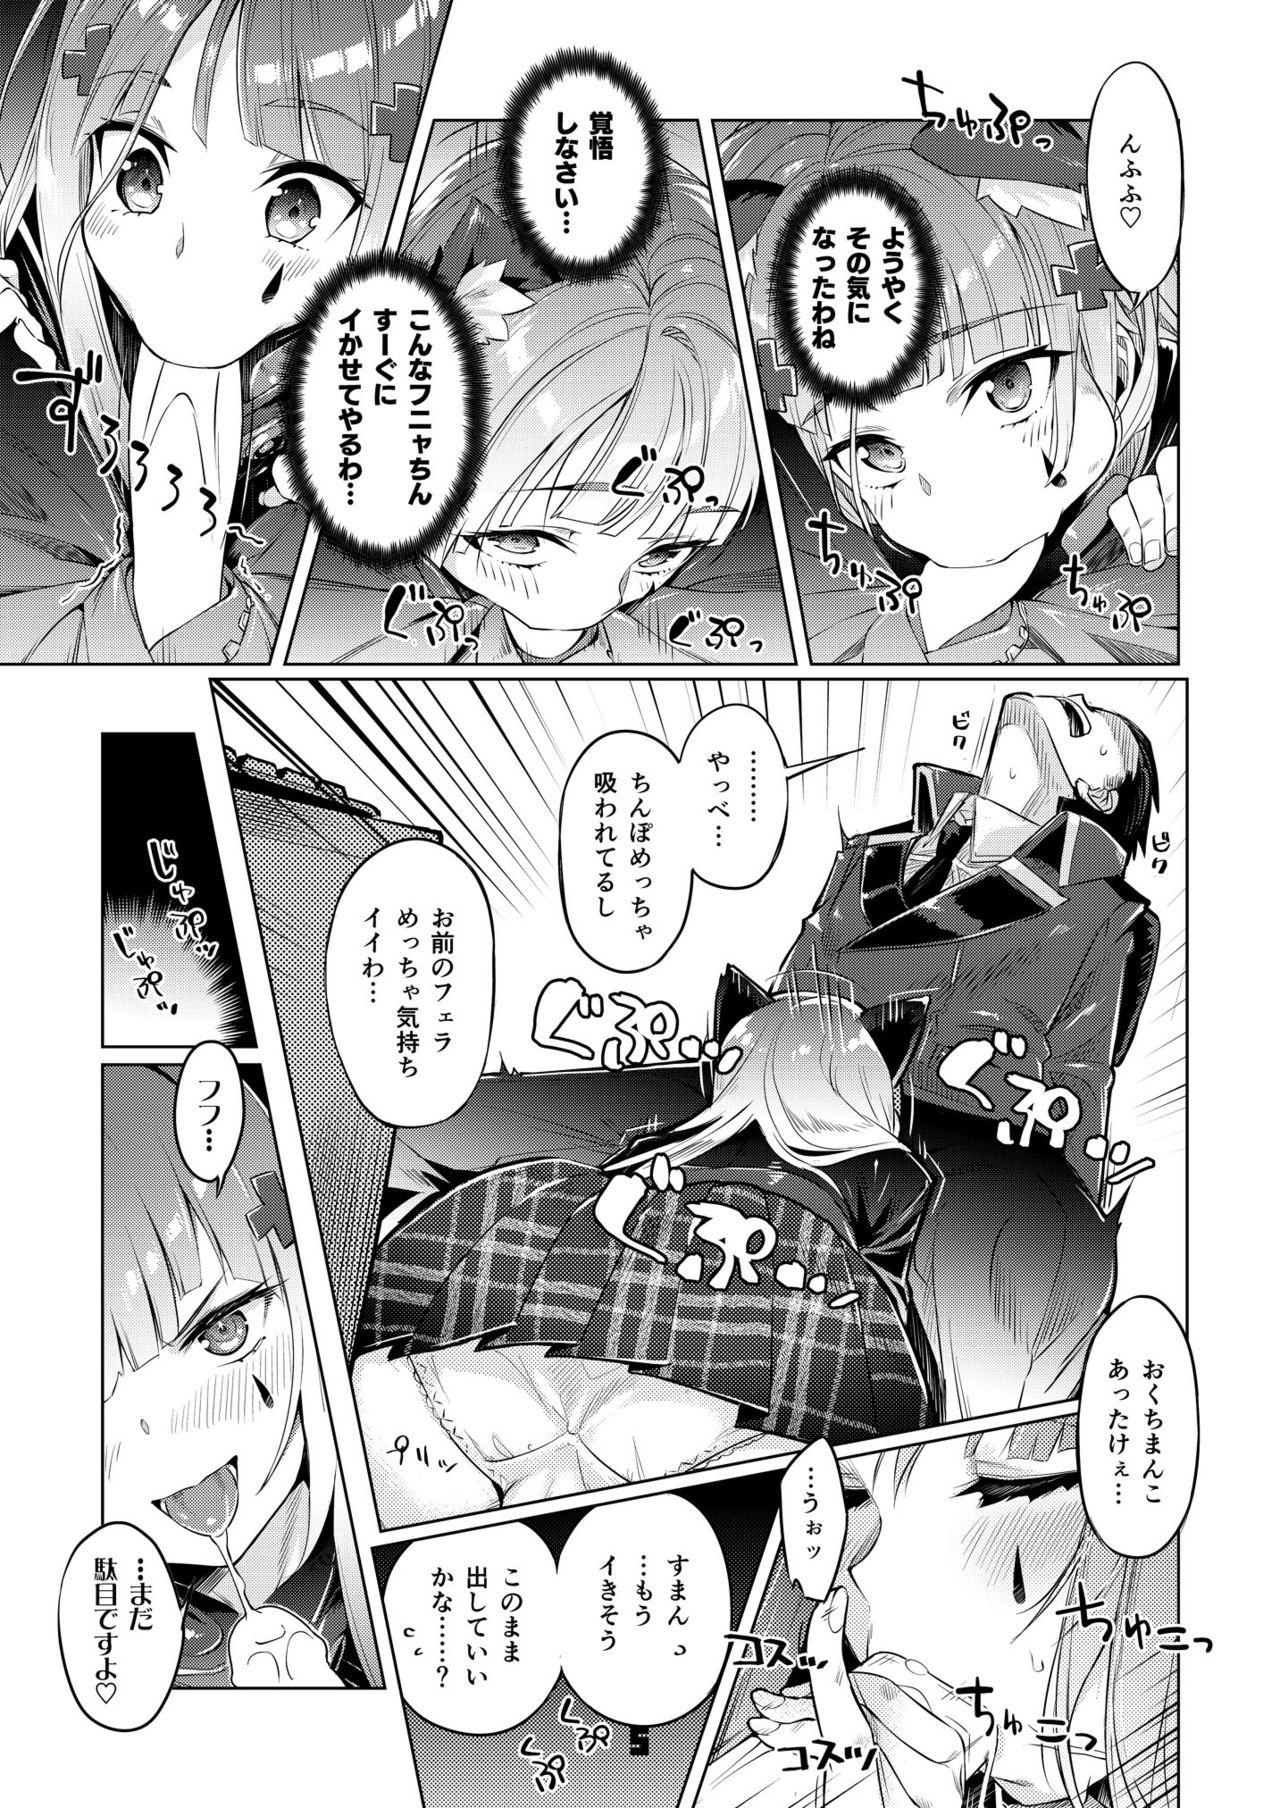 With Nekomimi Attachment - Girls frontline Ass Fucking - Page 5